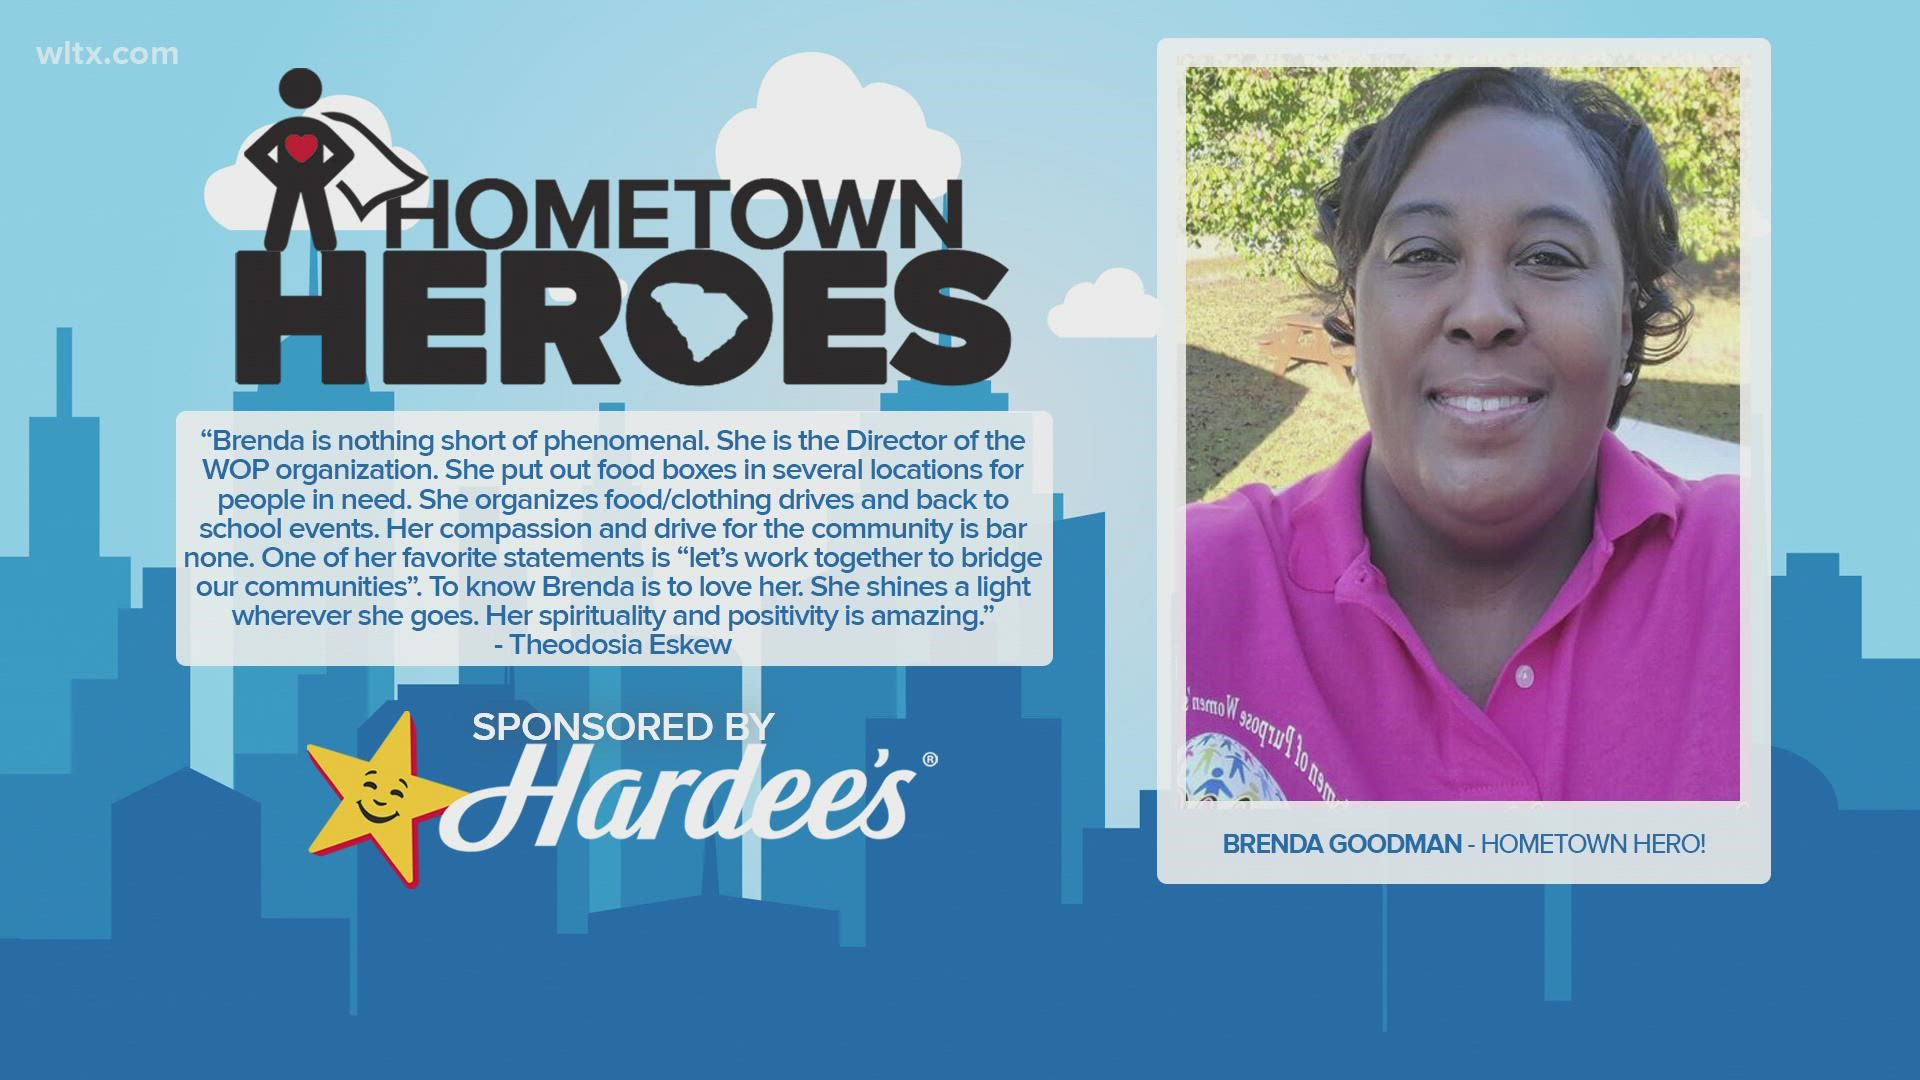 Brenda Goodman was nominated by her friend as a Hometown Hero because of her compassion and drive for the community.